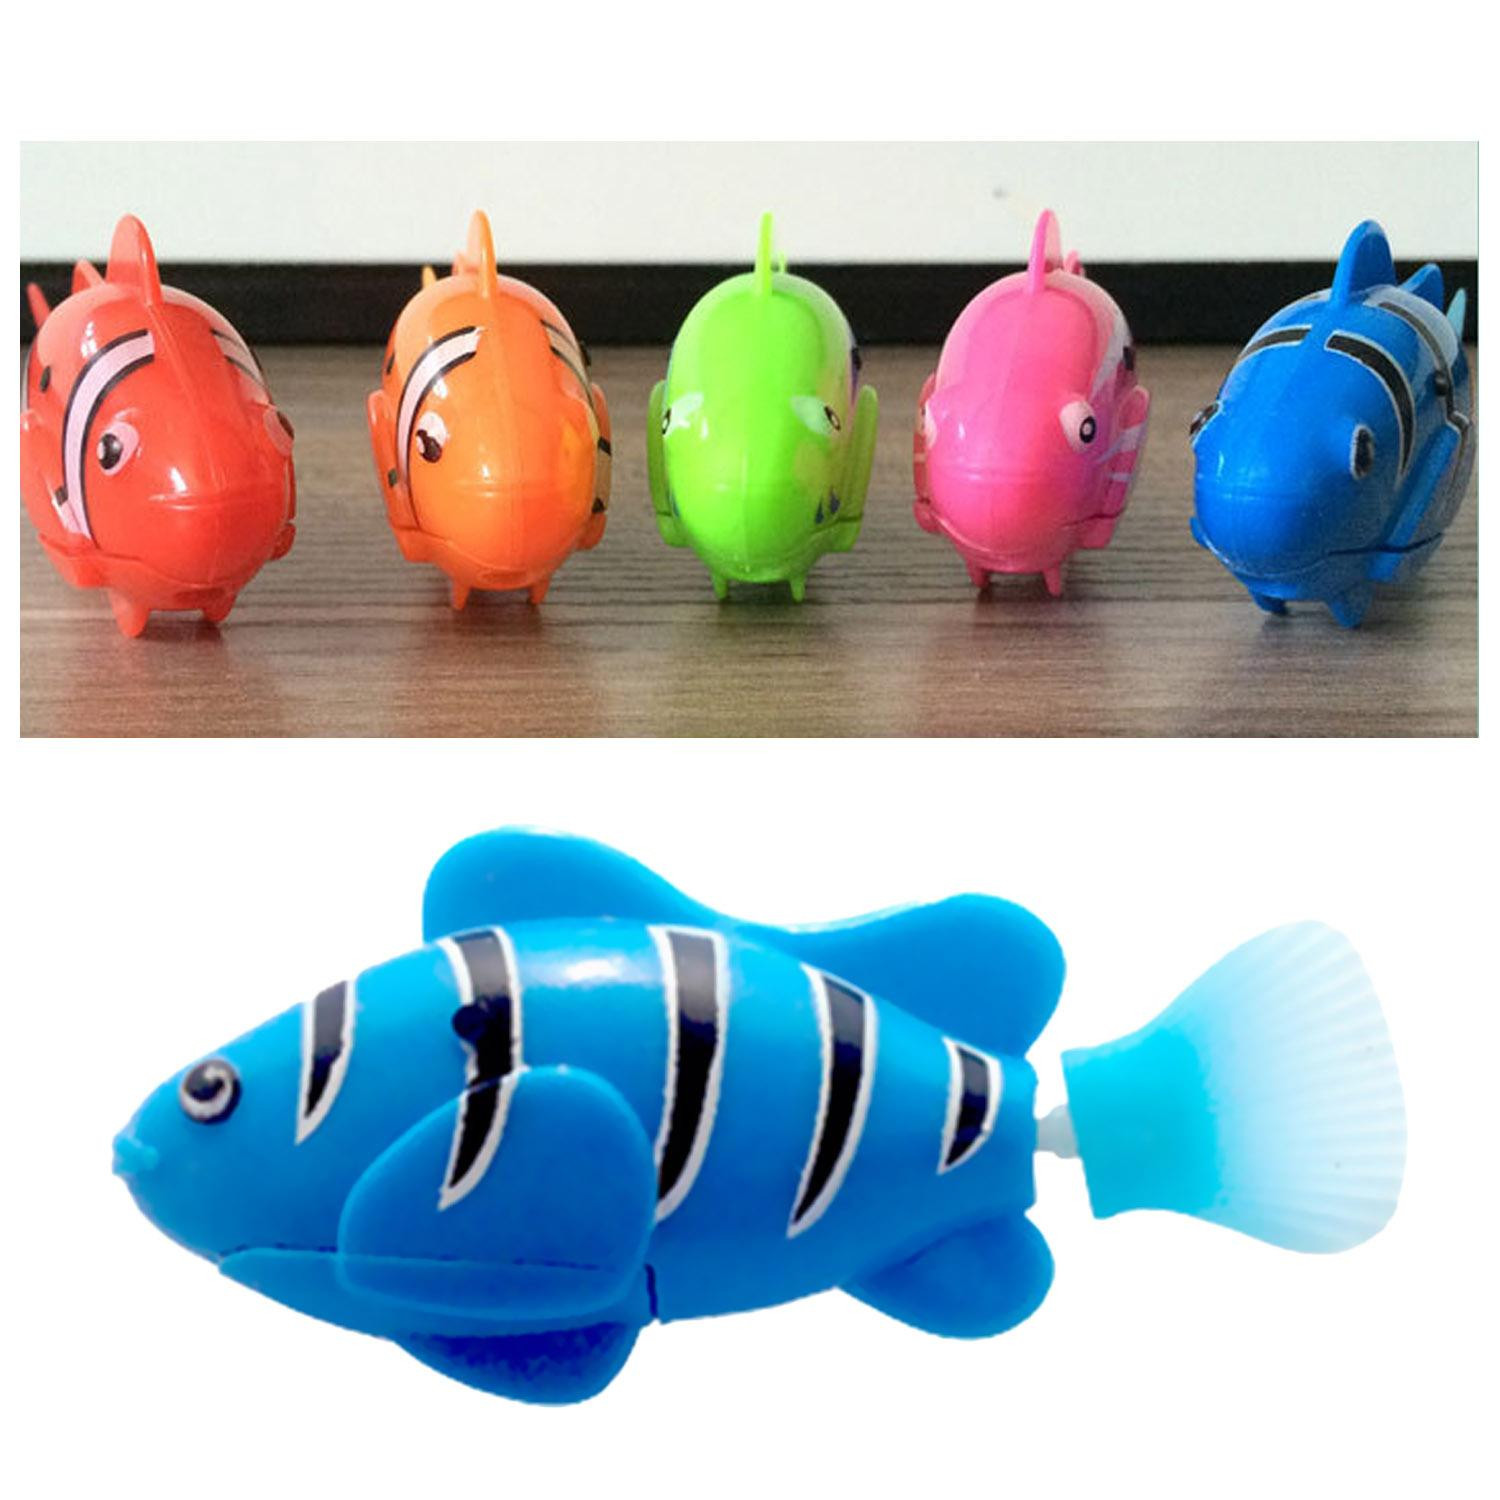 25 Elegant Round Fish Bowl Vase 2024 free download round fish bowl vase of aquariums buy aquariums at best price in malaysia www lazada com my within funny swim activated electric fish robotic simulated fish toy fish tank aquarium ornaments 